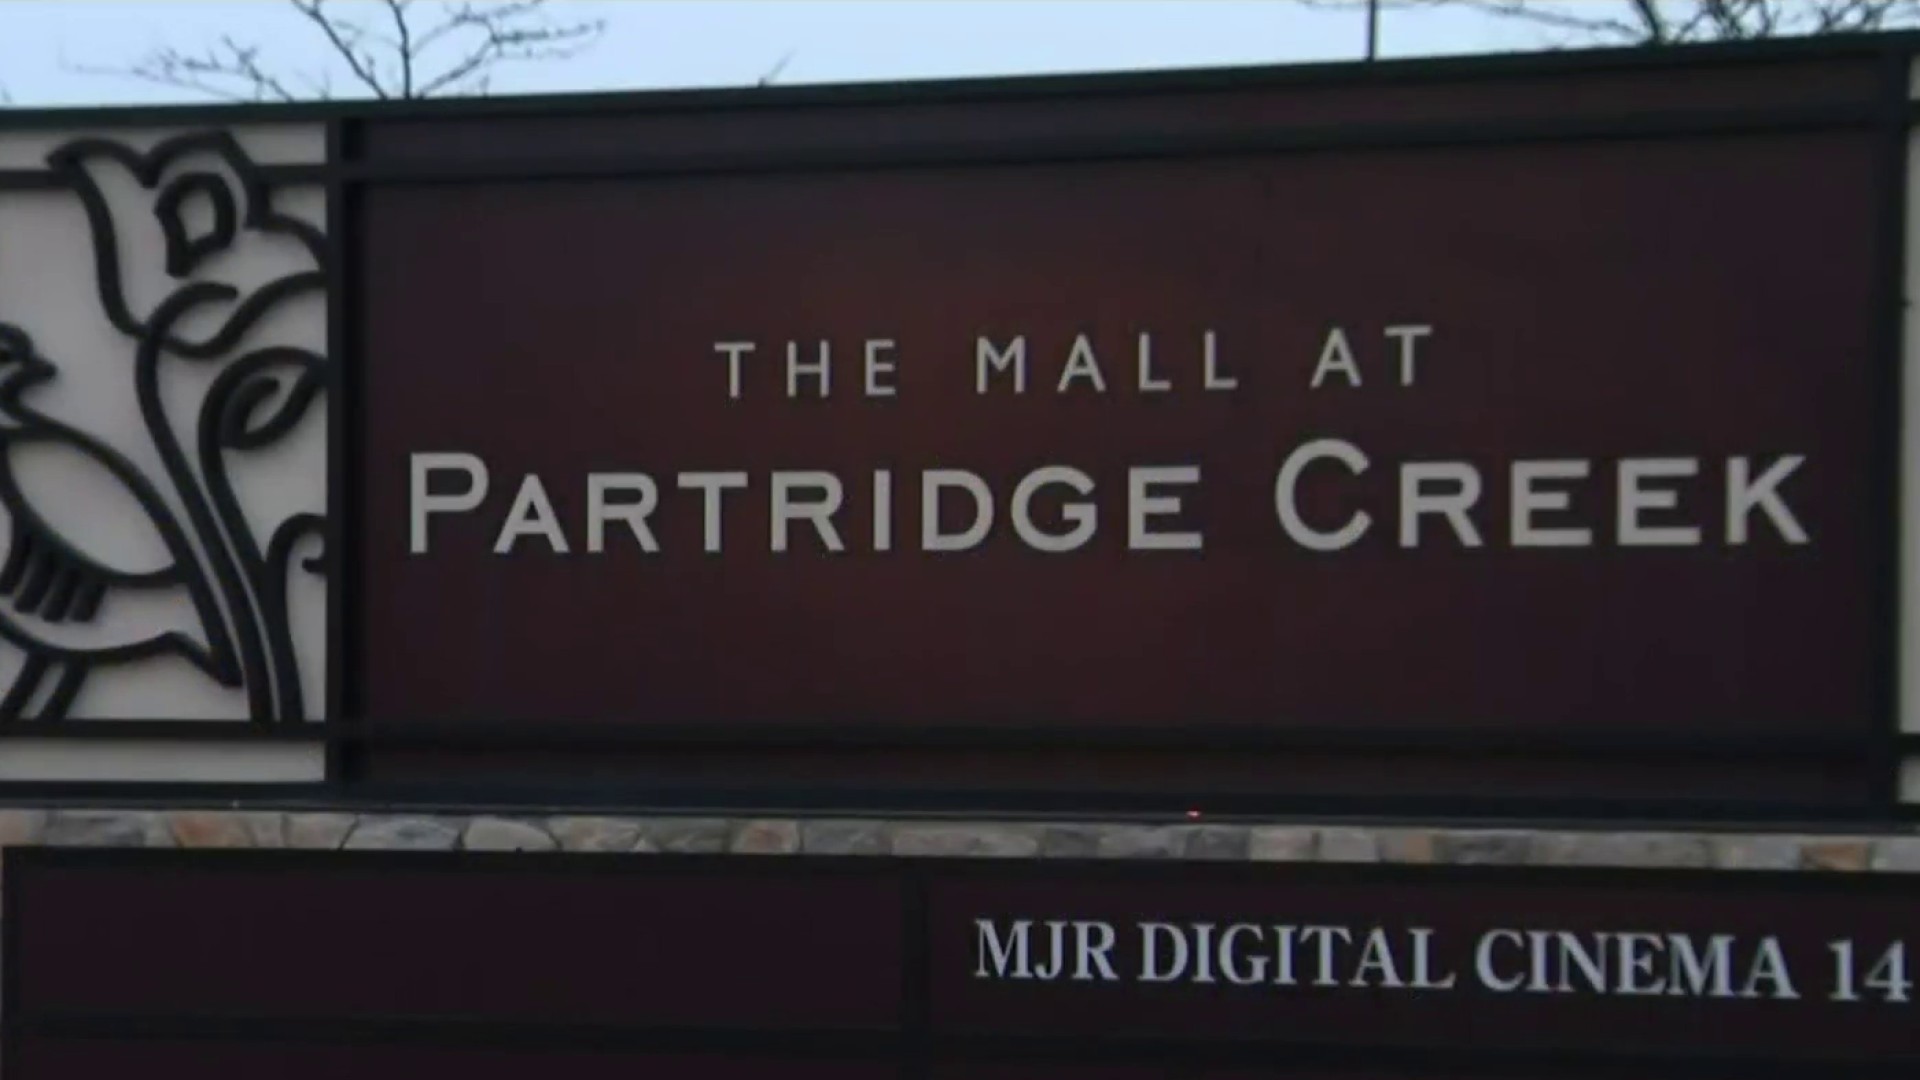 The Mall at Partridge Creek